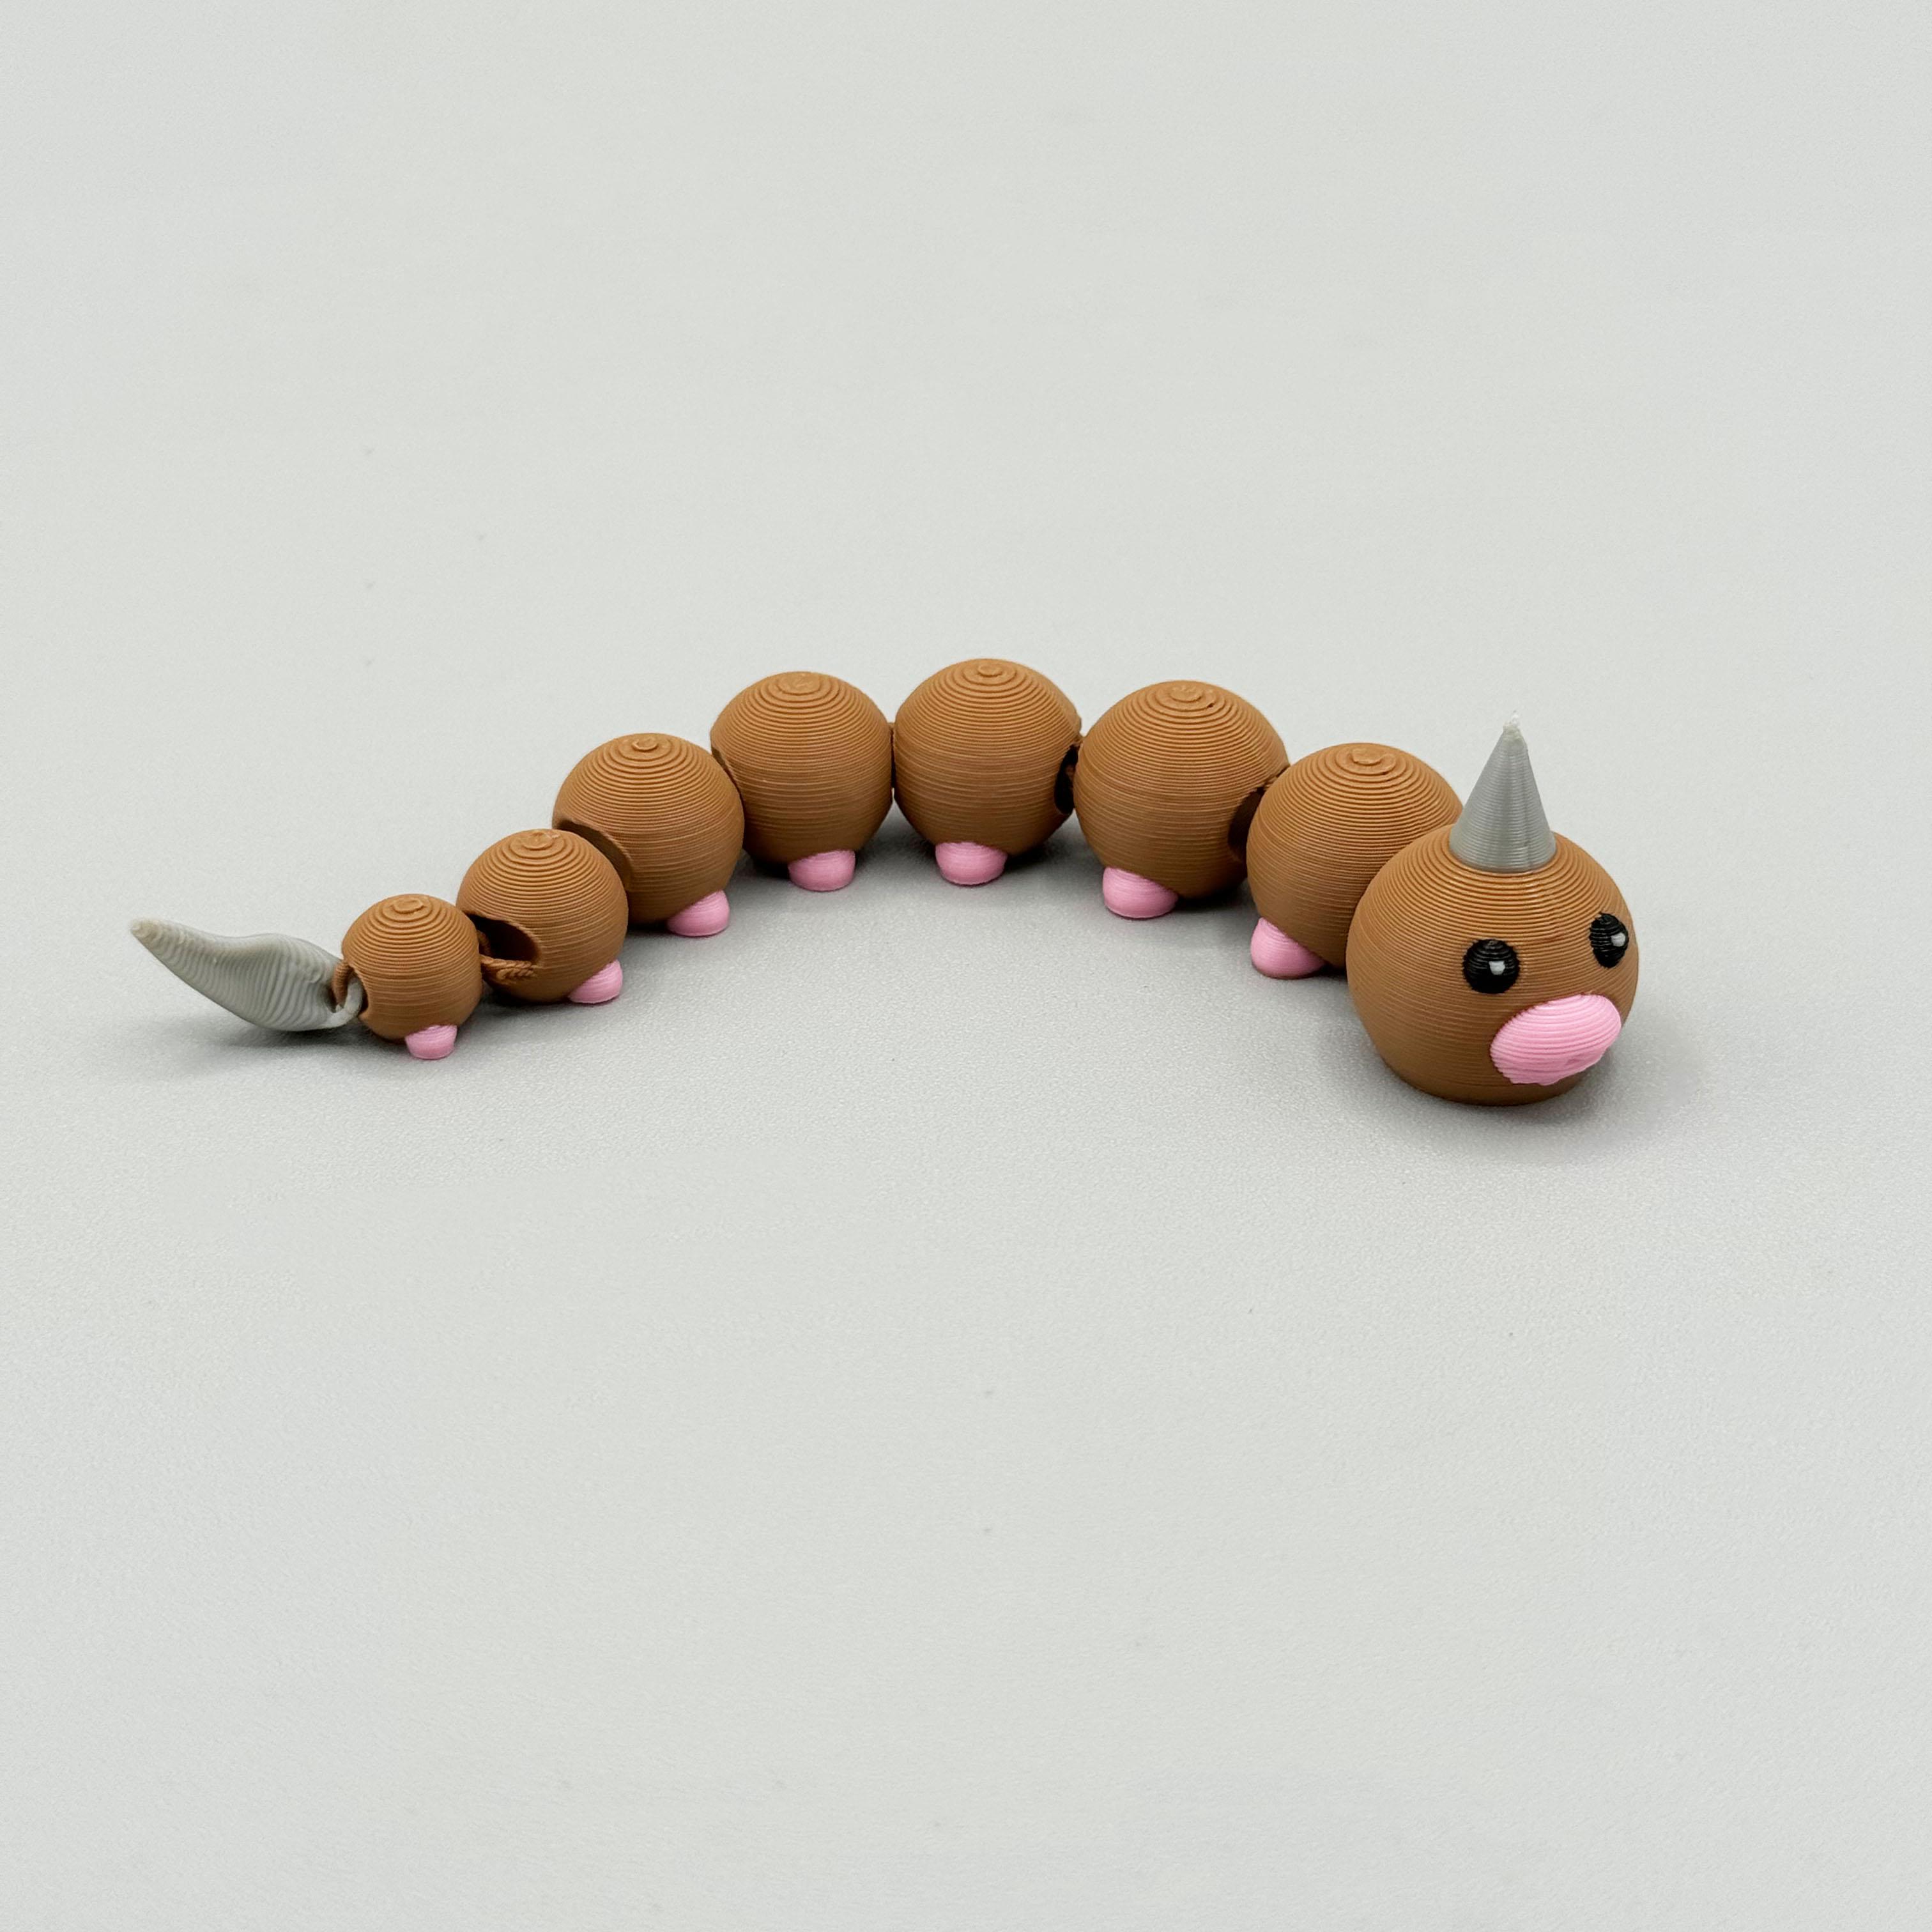 Weedle Pokemon Articulating Flexy - Flexi - Print in Place 3d model